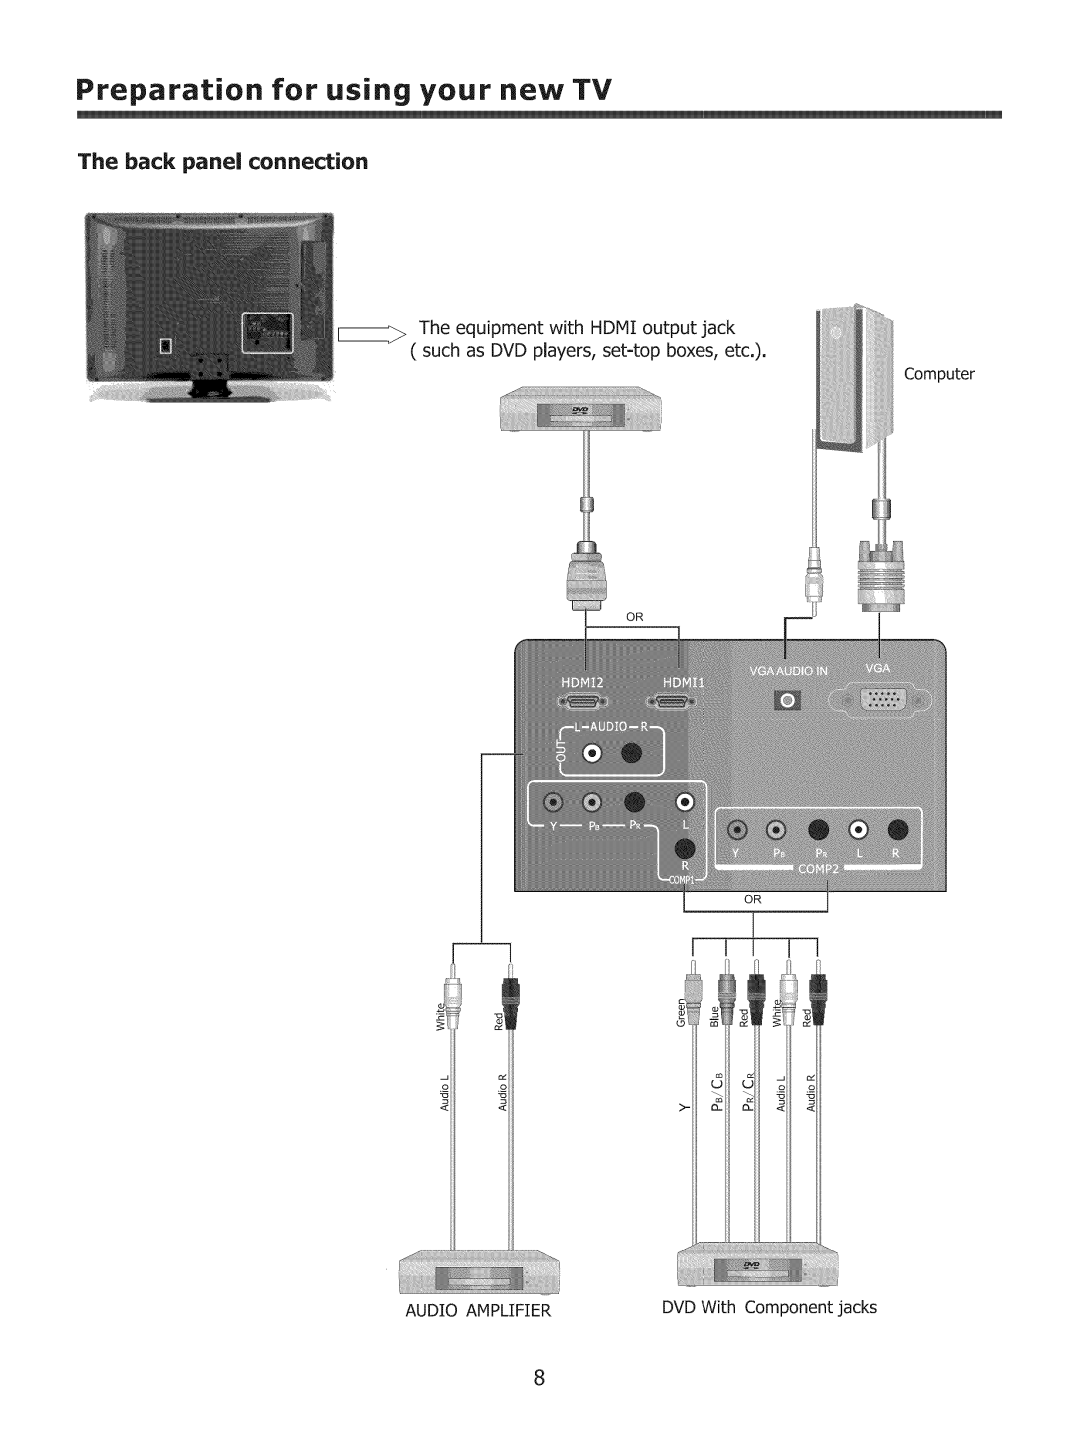 ProScan 37LC30S57 user manual Preparation for using your new TV, The back pane connection 